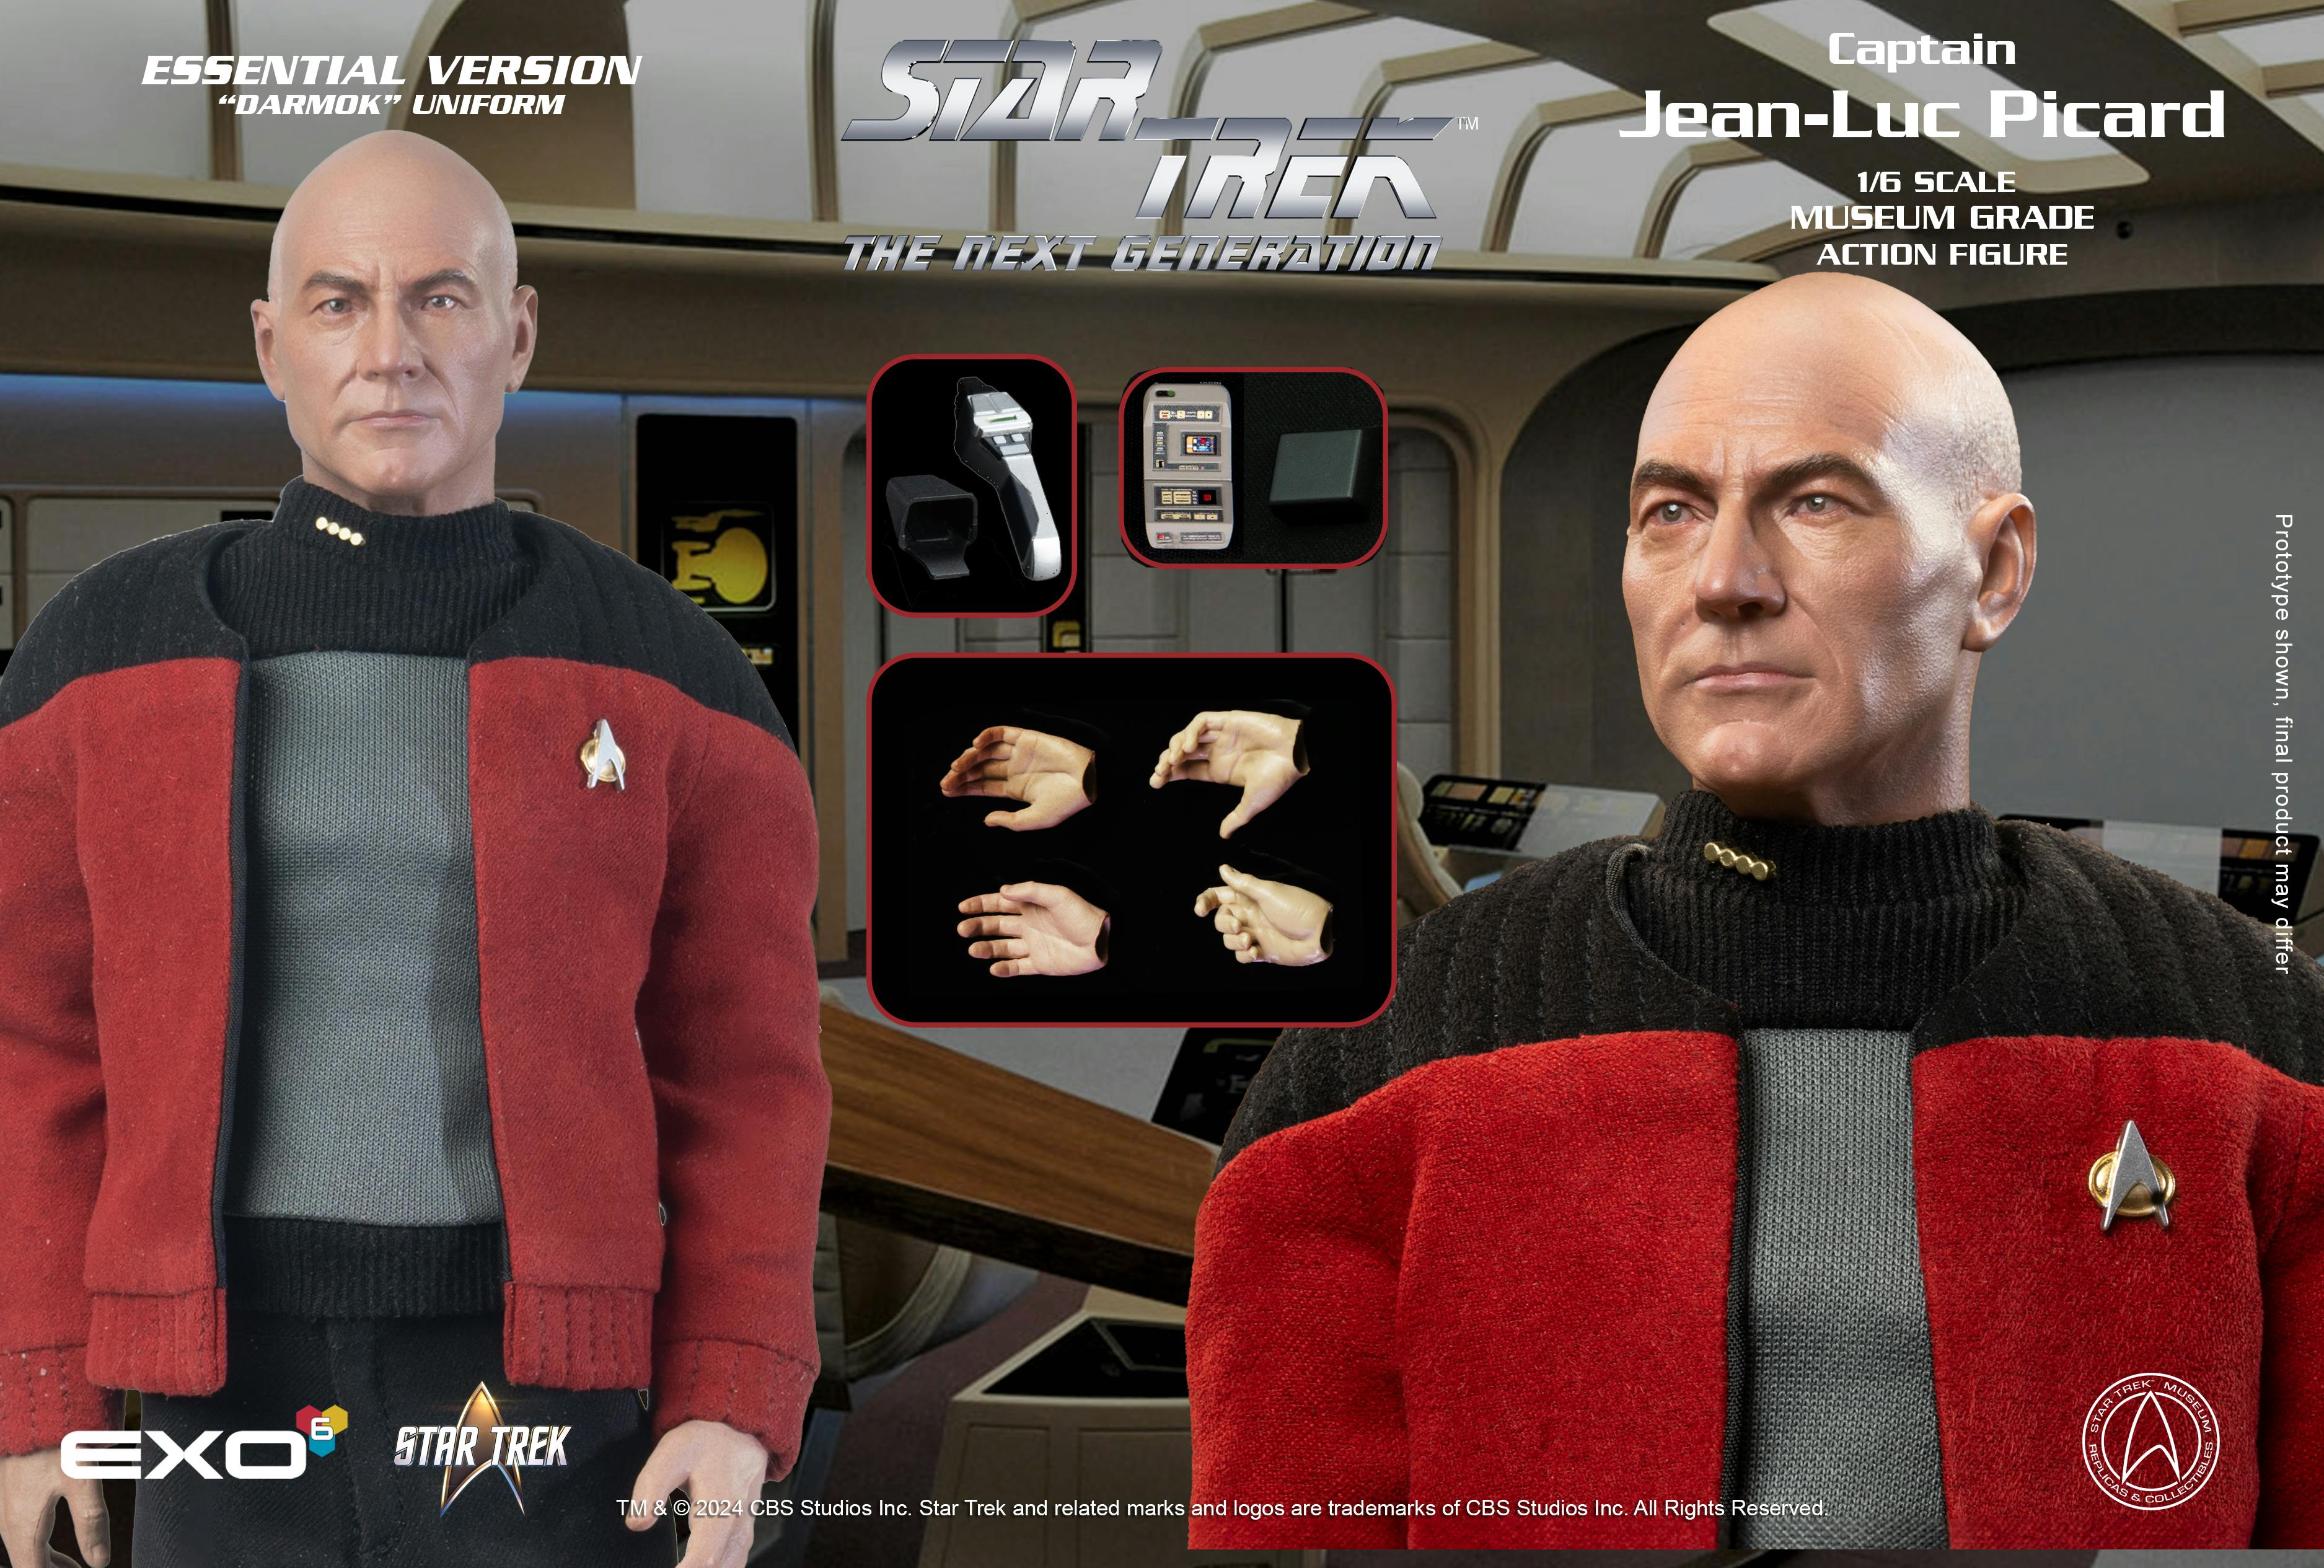 EXO-6 Star Trek: The Next Generation Jean-Luc Picard Essential Version of the figure with all its offerings and 'Darmok' Uniform